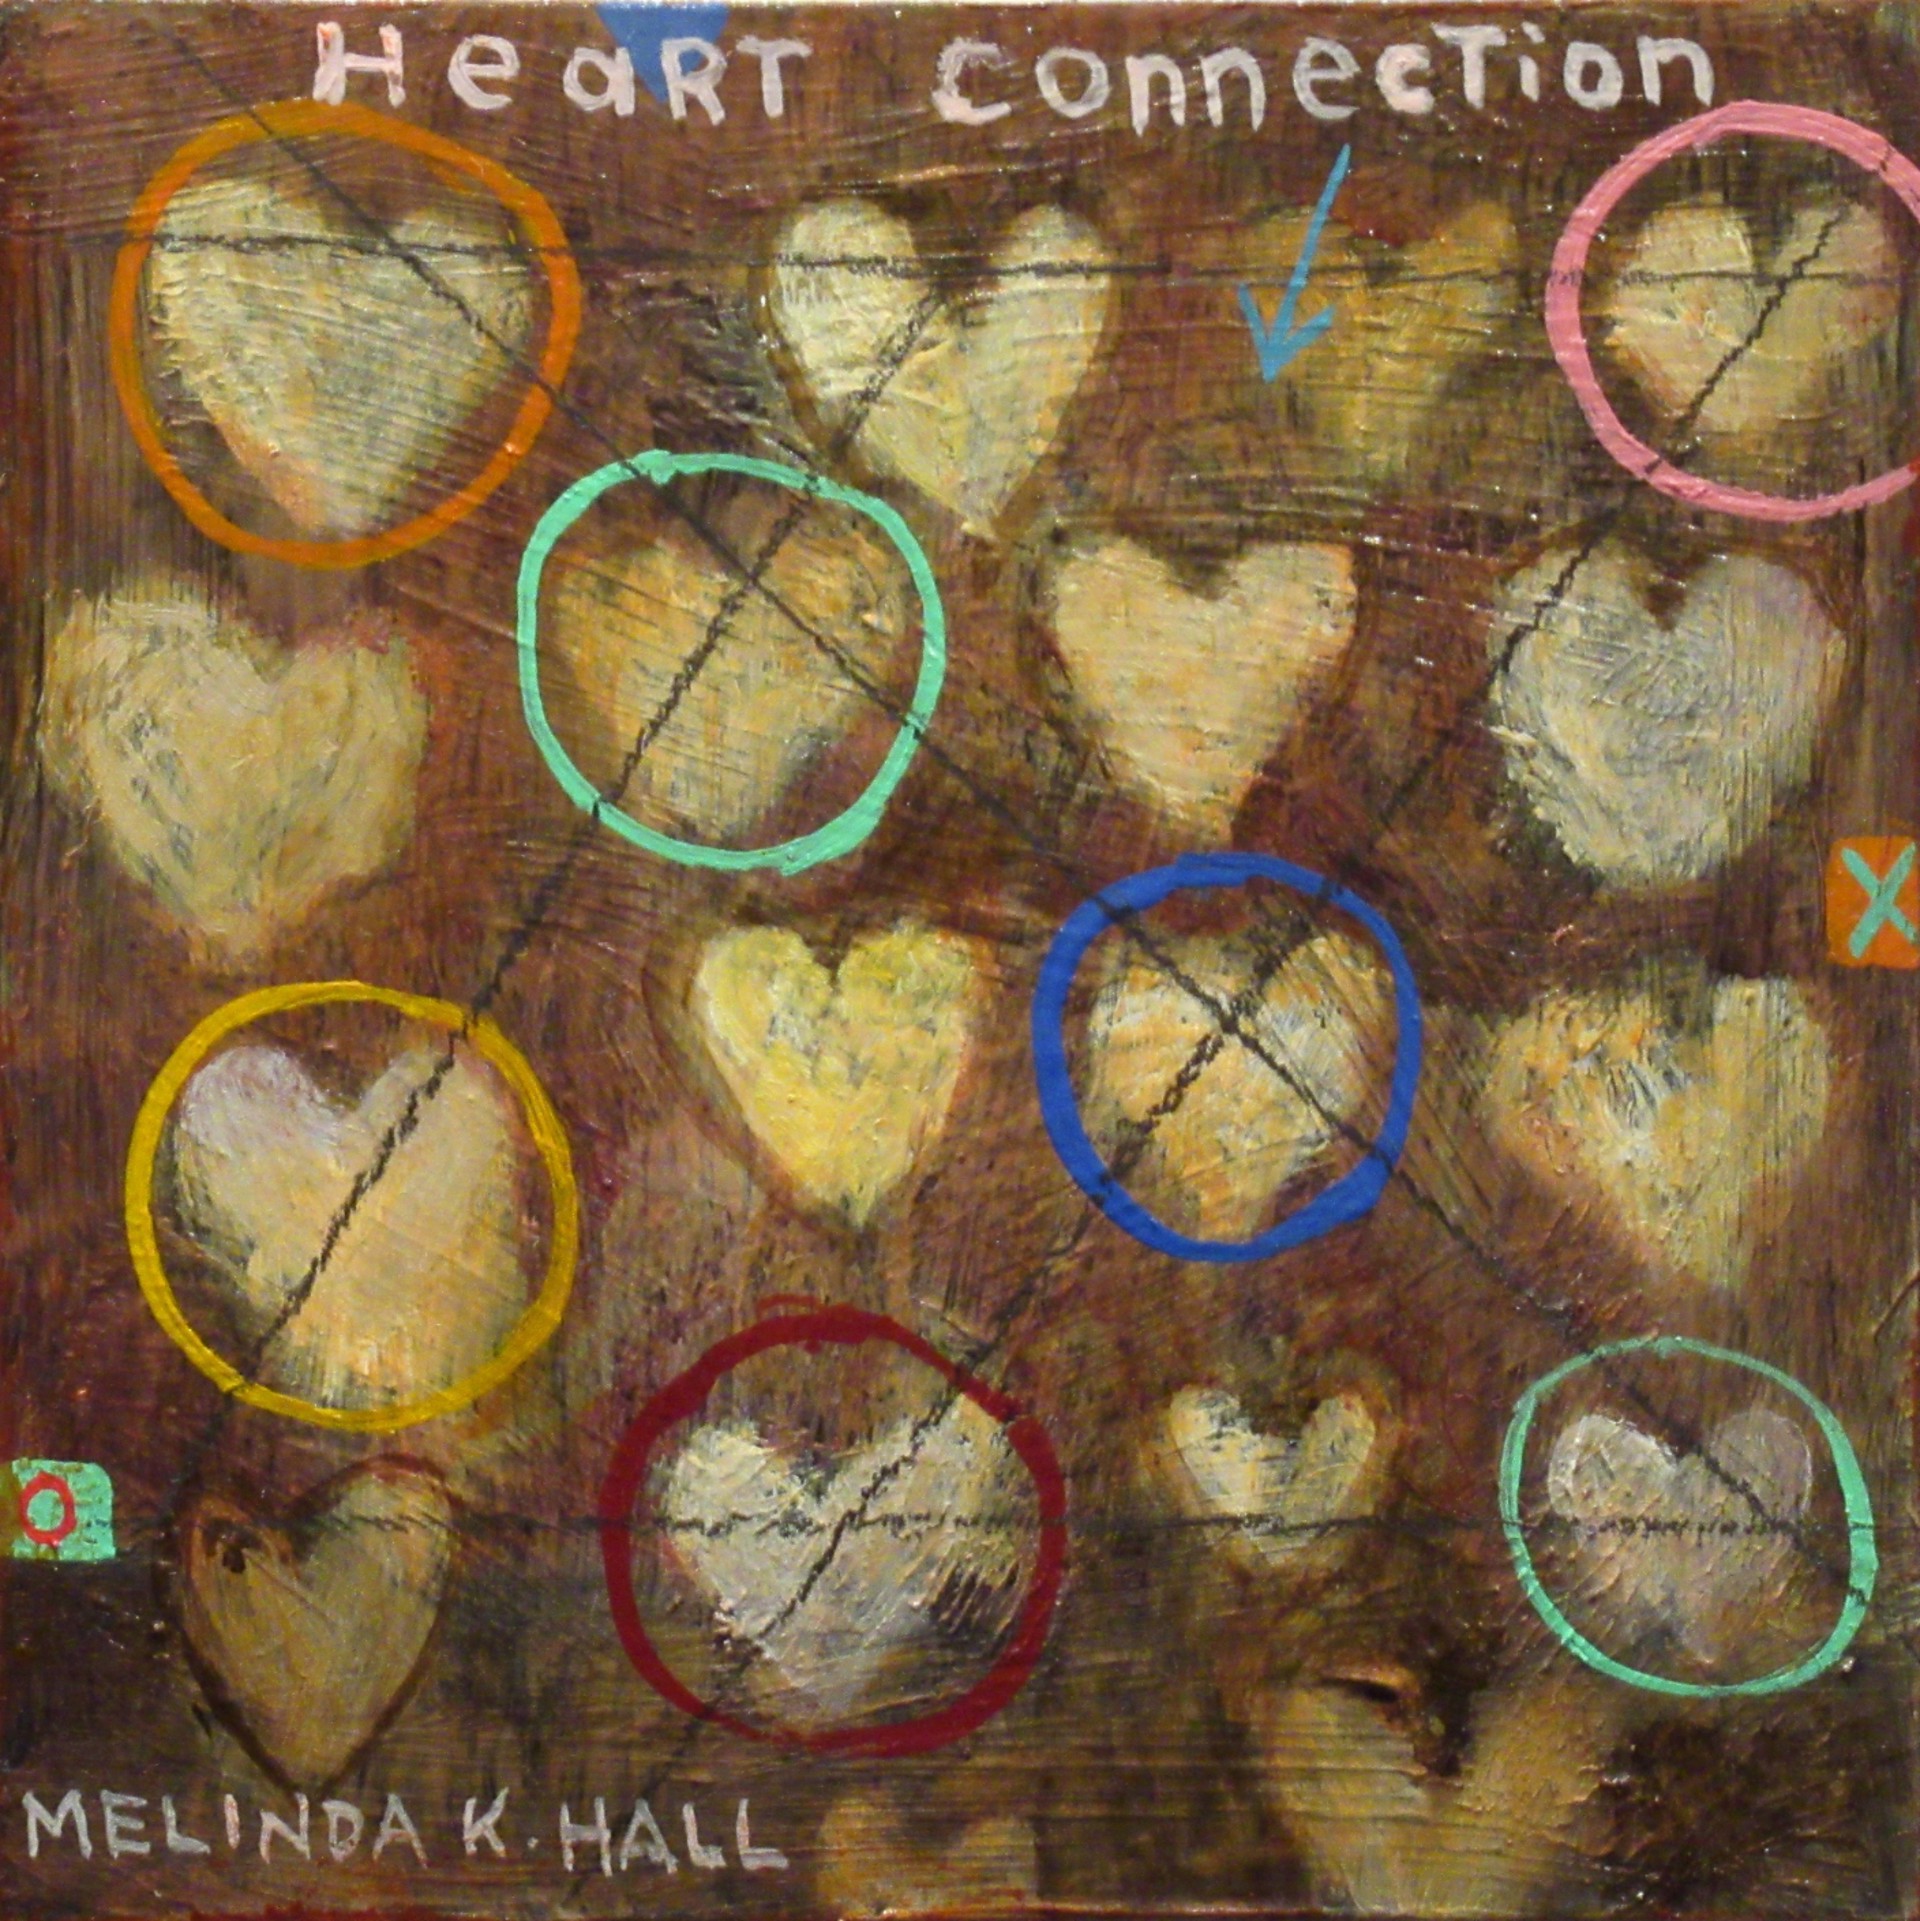 Heart Connection by Melinda K. Hall